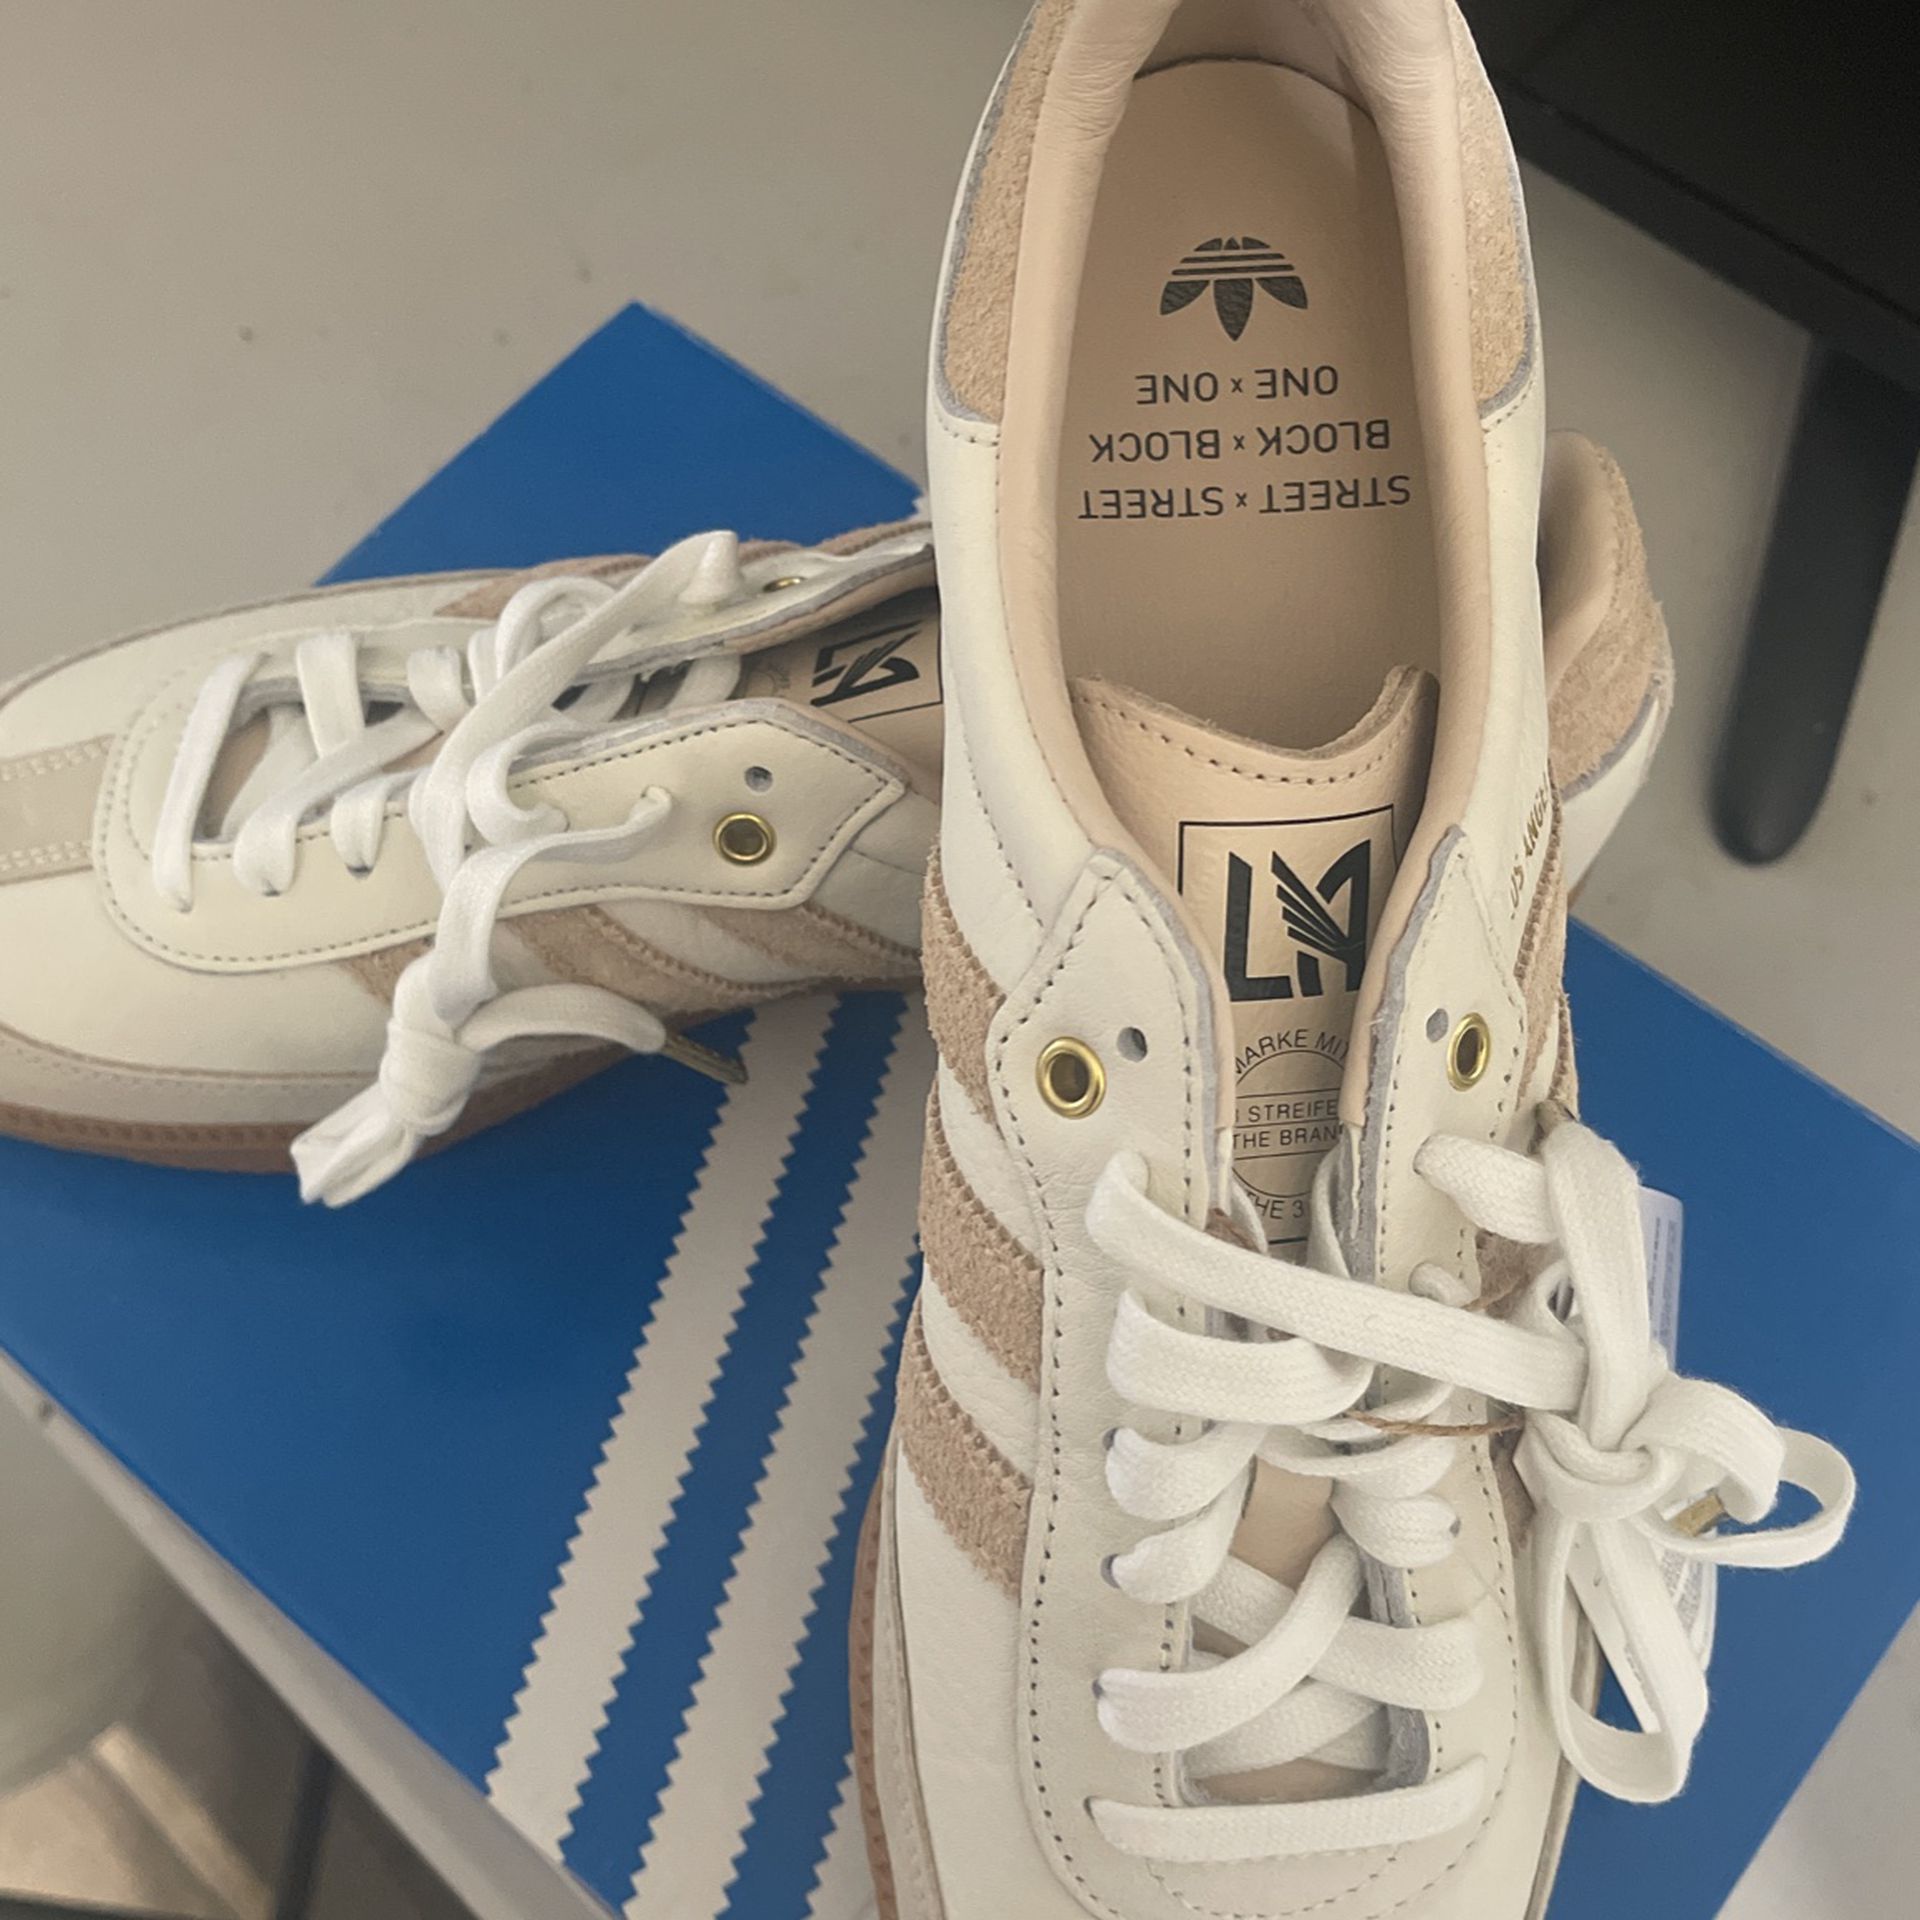 New Adidas Samba LAFC Los Angeles Linen Gum Sneakers for Sale in Puyallup,  WA - OfferUp